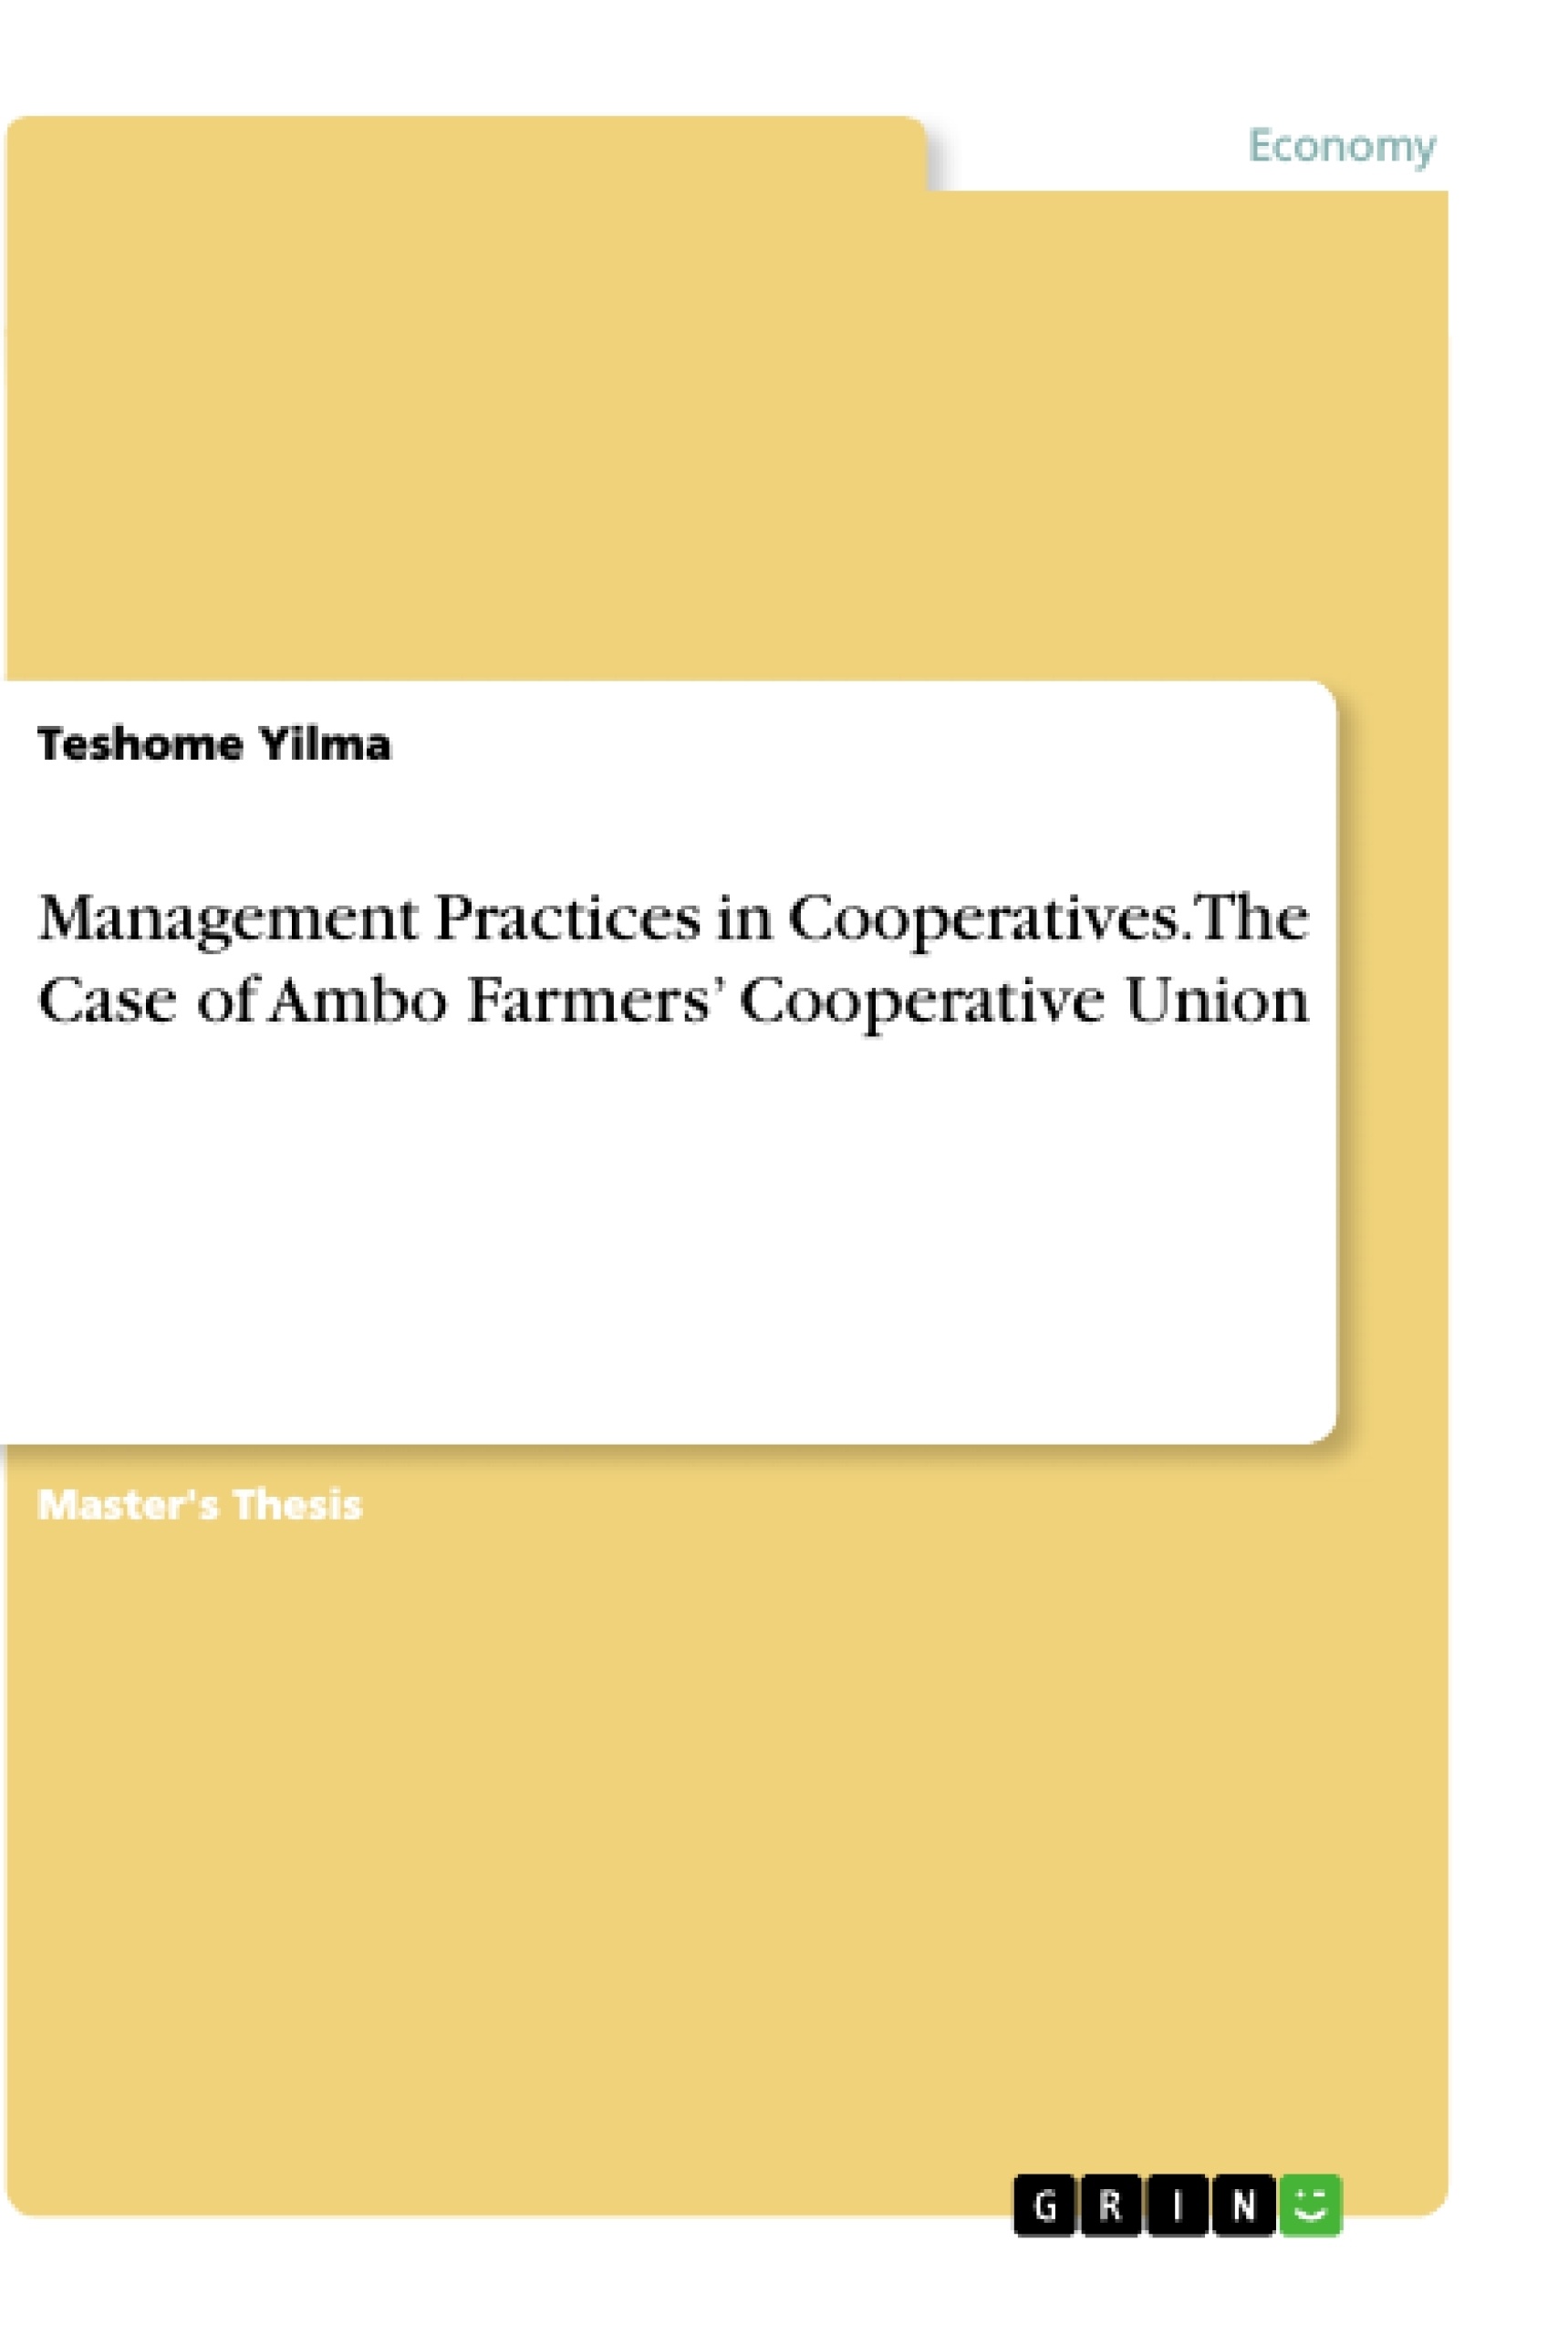 Título: Management Practices in Cooperatives. The Case of Ambo Farmers’ Cooperative Union